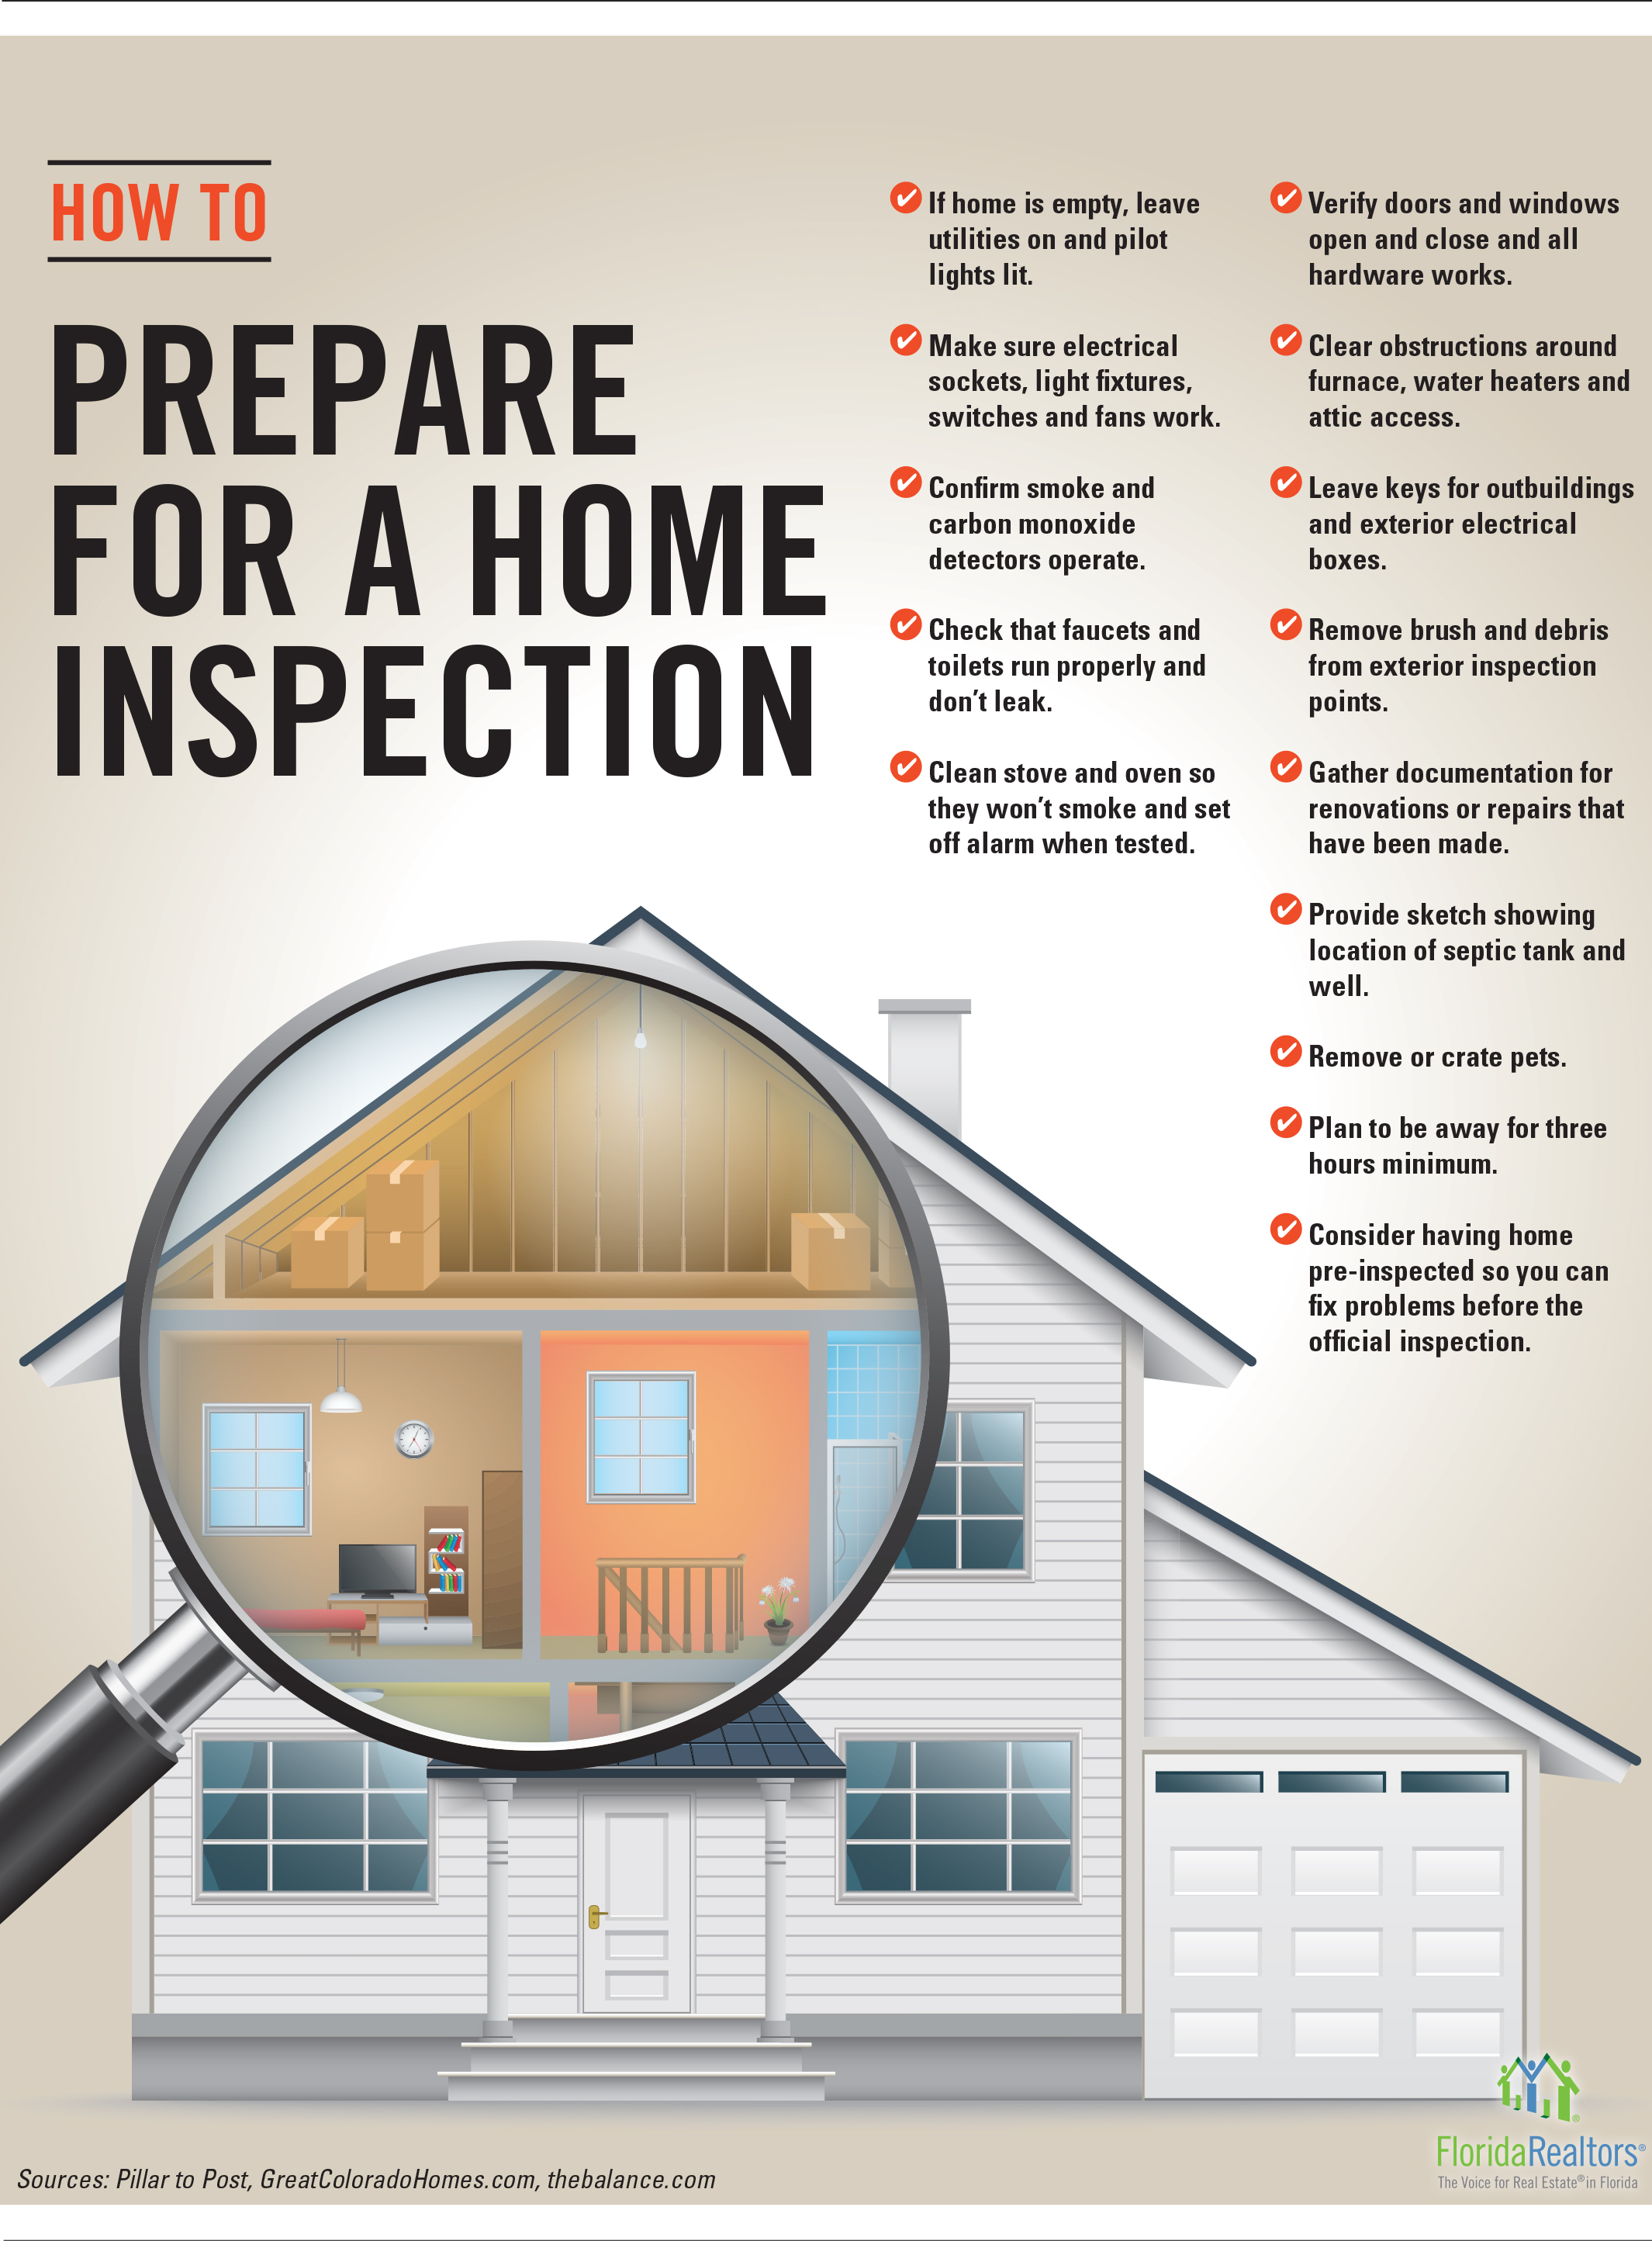 Home Inspections Benefits